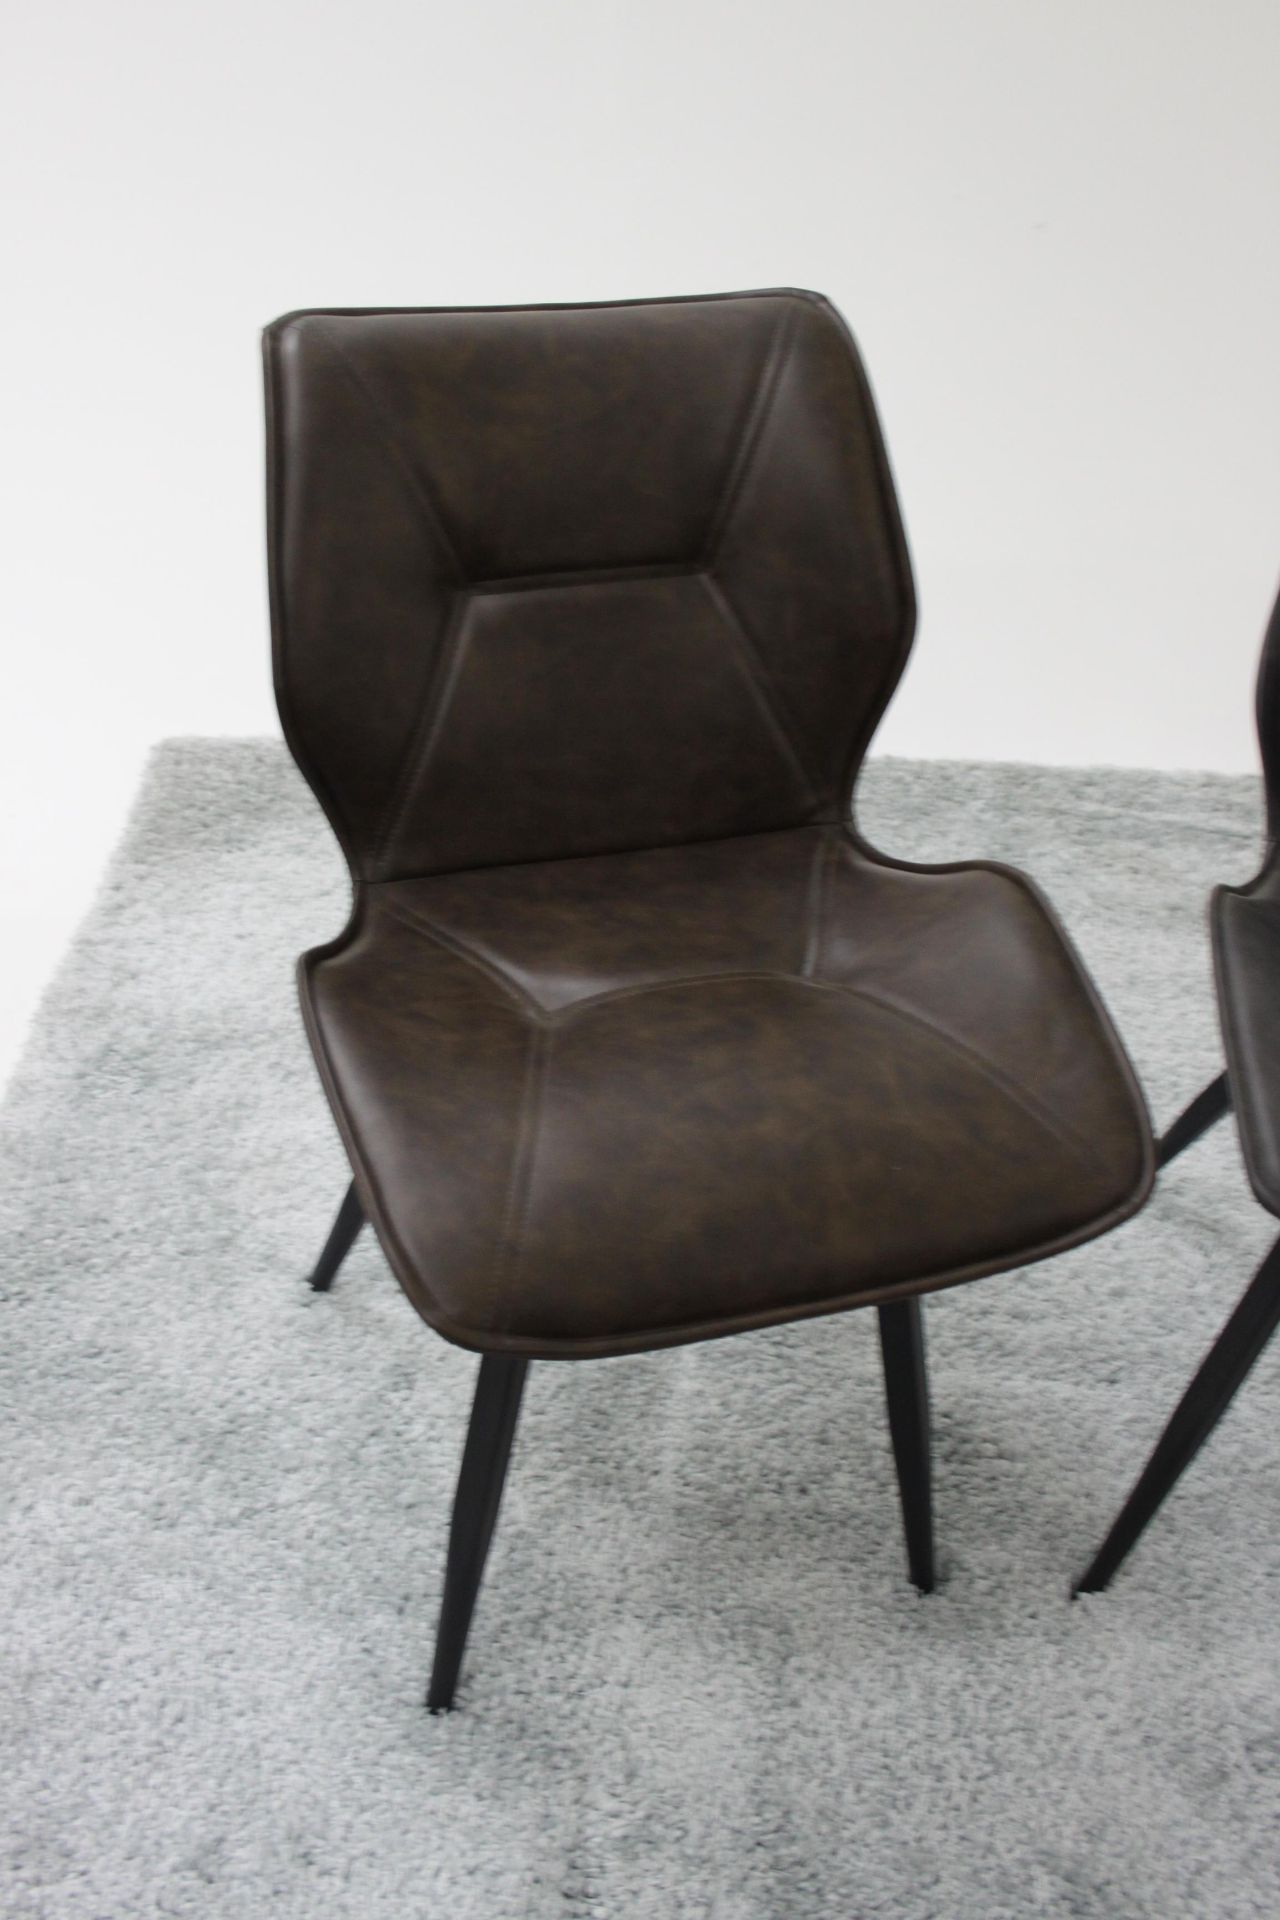 Alfa Ribbed Dining Chair Vegan Leather Chestnut Diamond Quilted Upholstery Gives A Luxury Finish